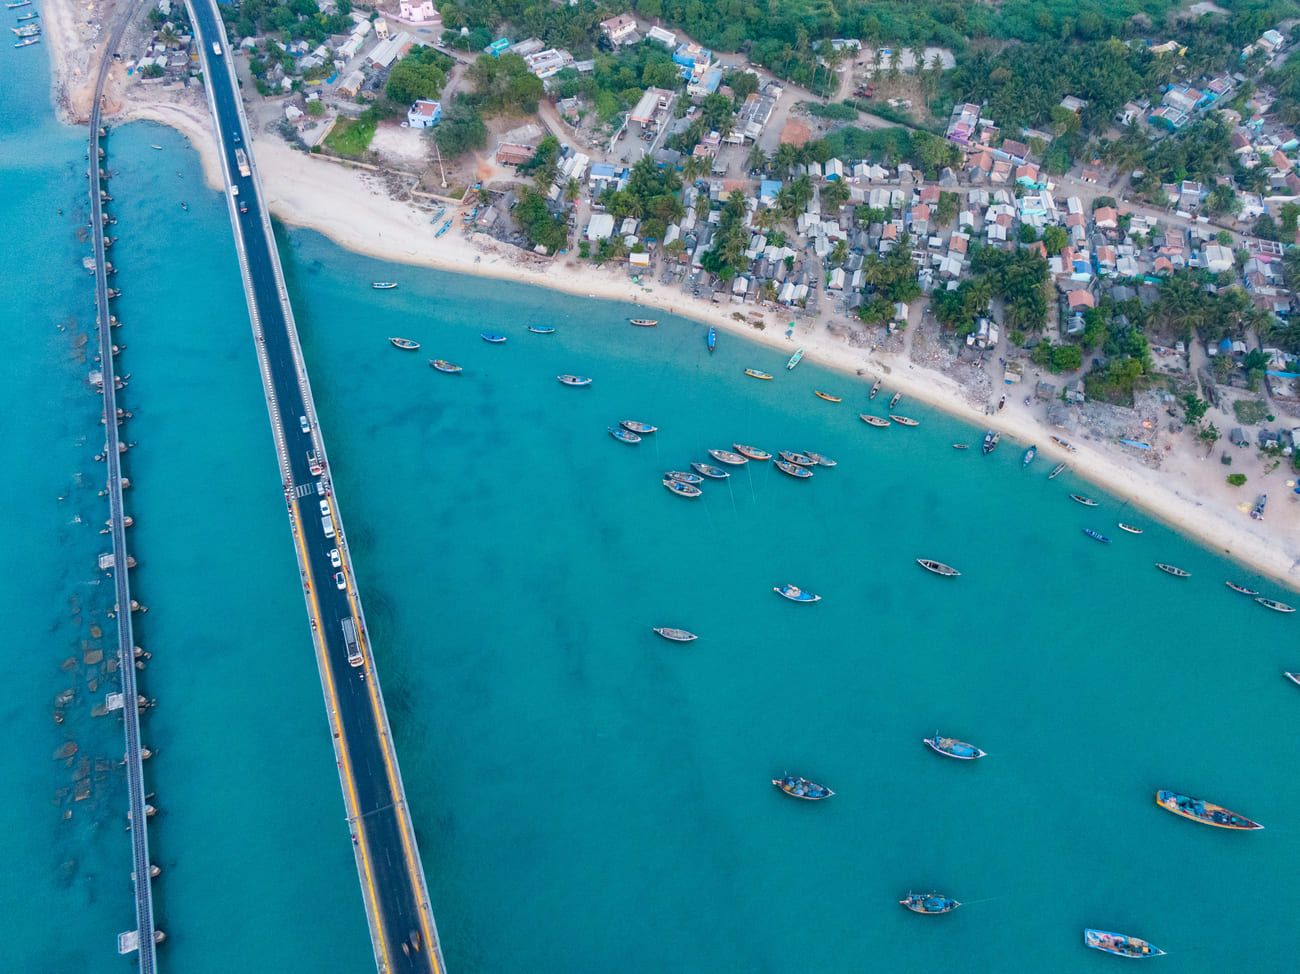 Spectacular drone shot of Pamban Bridge and road across a turquoise sea with boats floating near the beach 